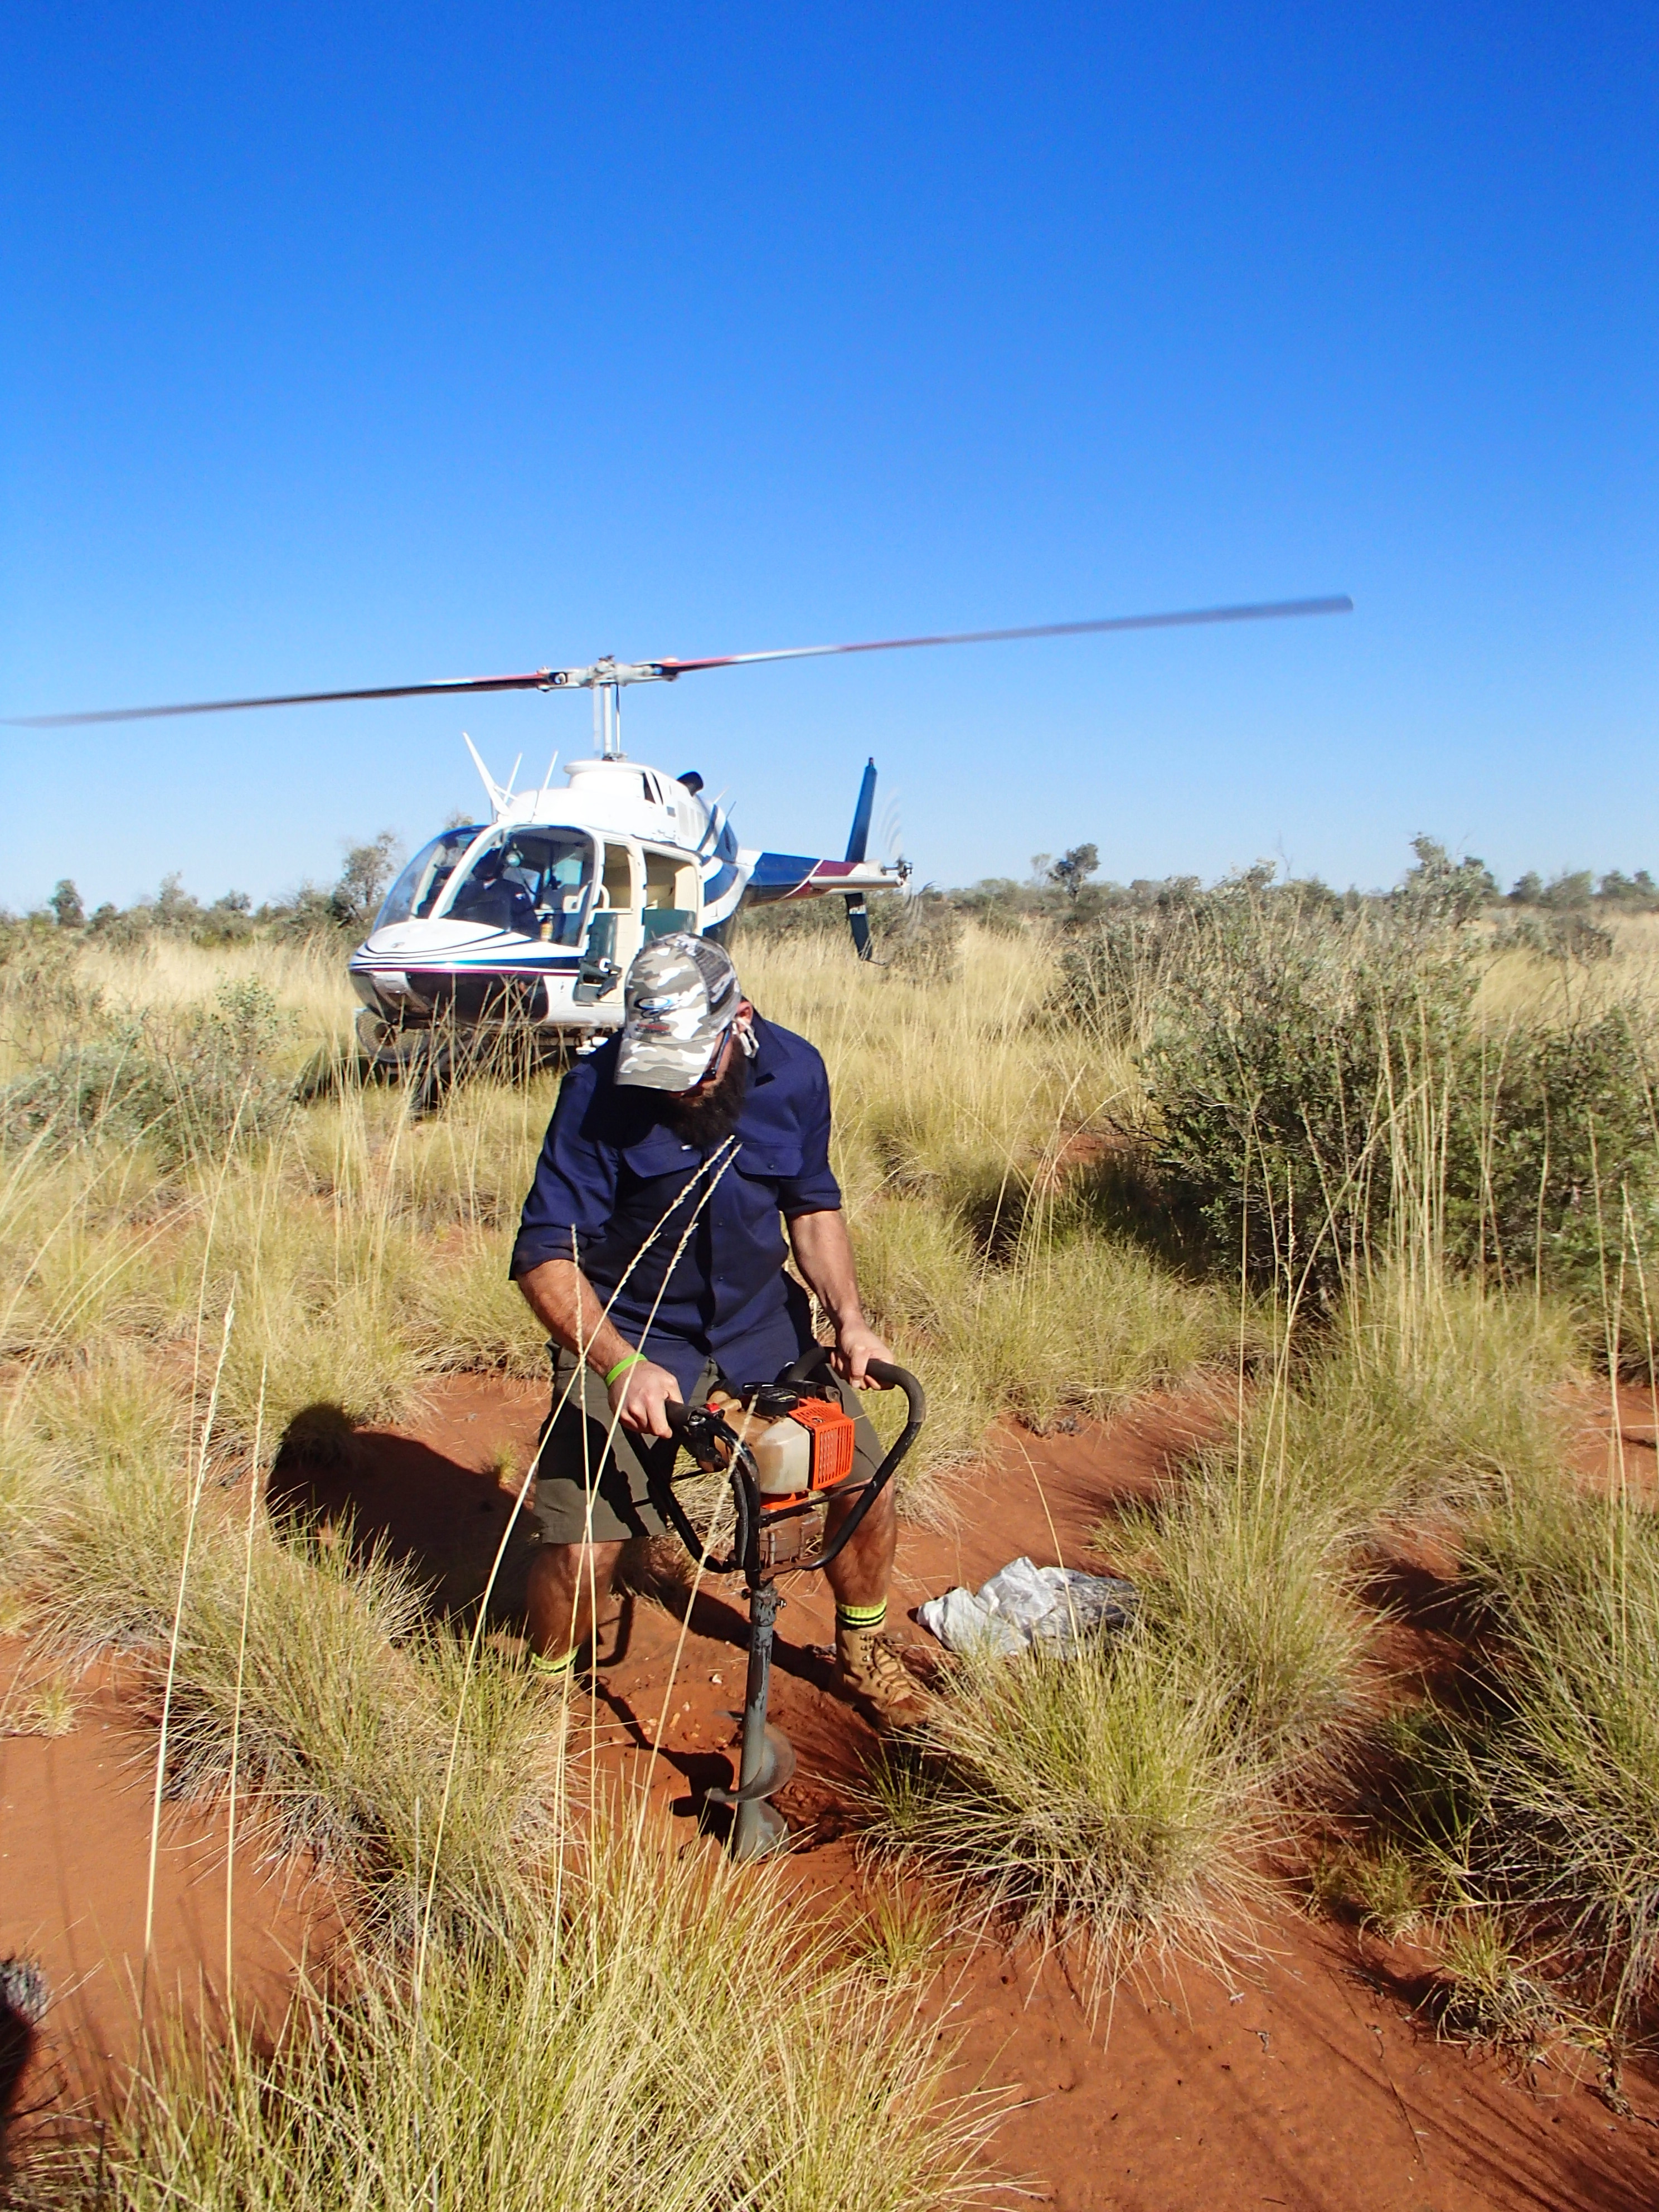 In areas of weakly consolidated regolith, a power auger is used to collect regolith samples. The auger, with a 10 cm diameter bit, has a maximum penetration depth of 90 cm, and can fit in the skid-mounted basket on the helicopter. Sample collection and recording of site information can be carried out in approximately seven minutes, avoiding a shut-down of the helicopter. - Paul Morris, Gov of WA